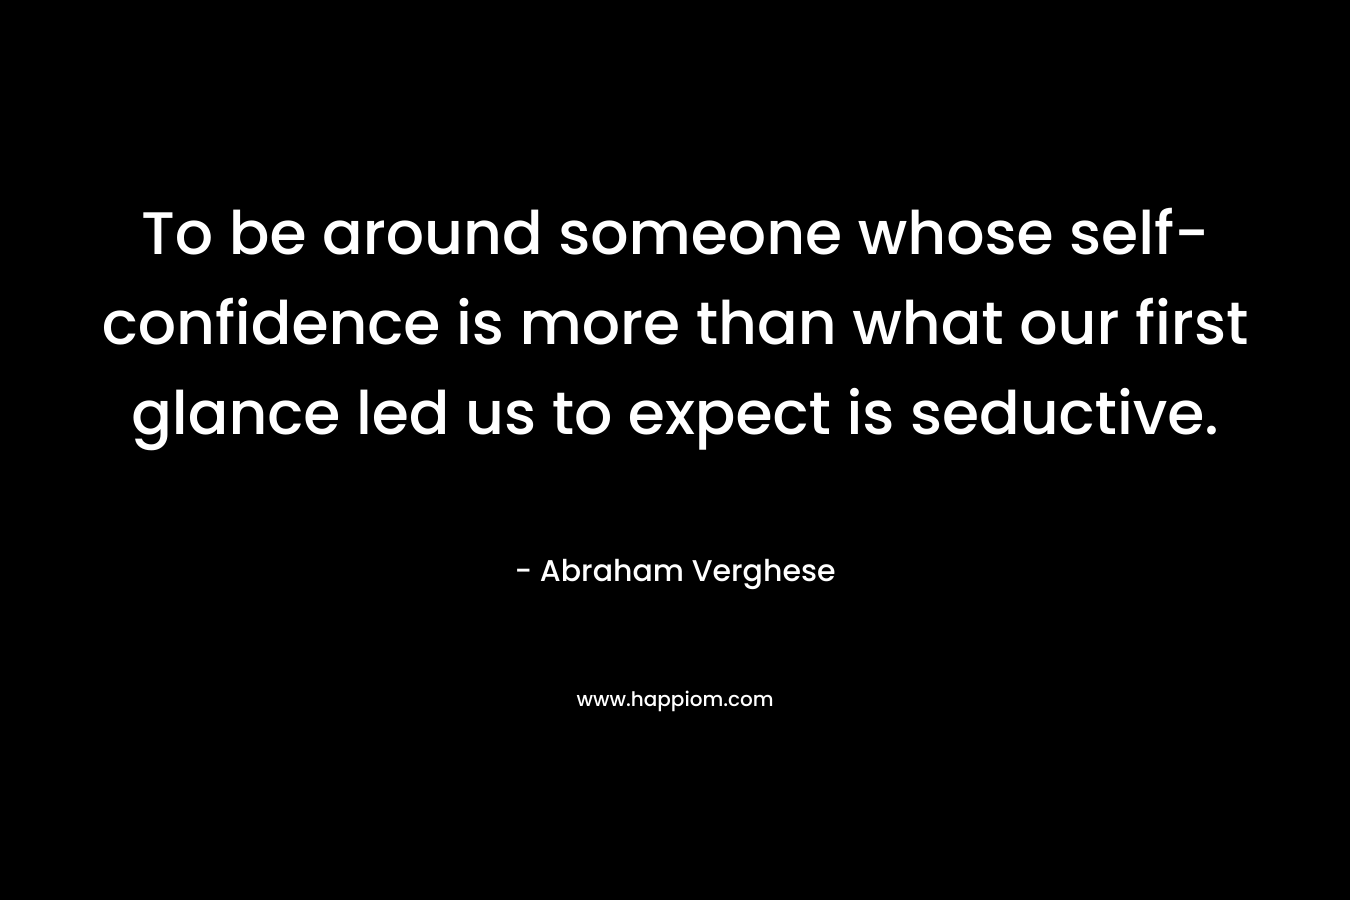 To be around someone whose self-confidence is more than what our first glance led us to expect is seductive. – Abraham Verghese